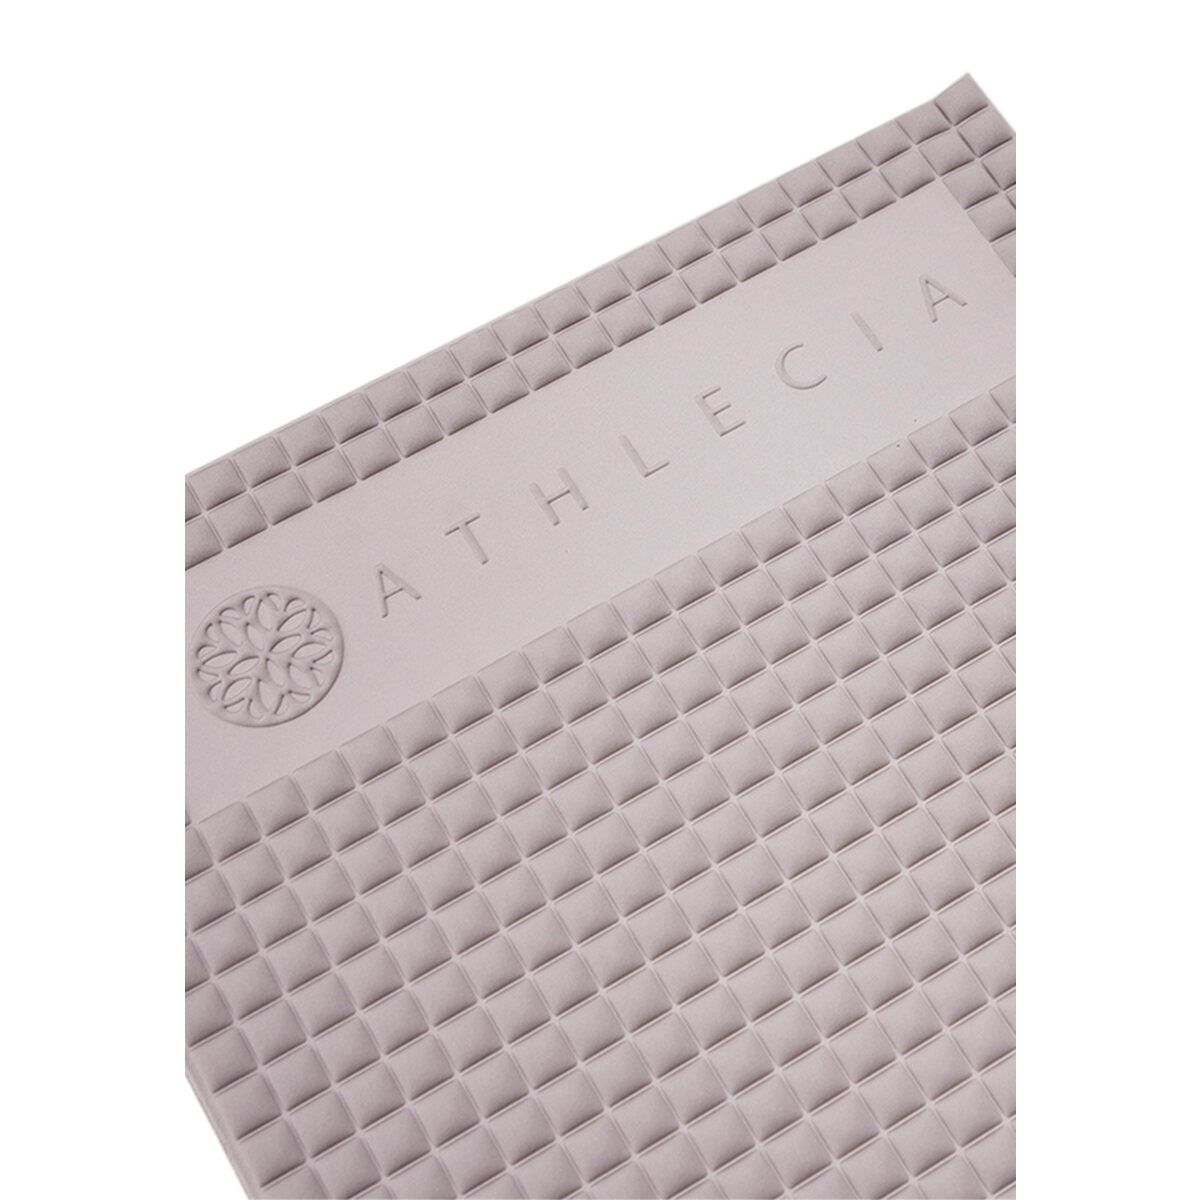 Exercise Mats -  athlecia Walgia W Quilted Yoga Mat